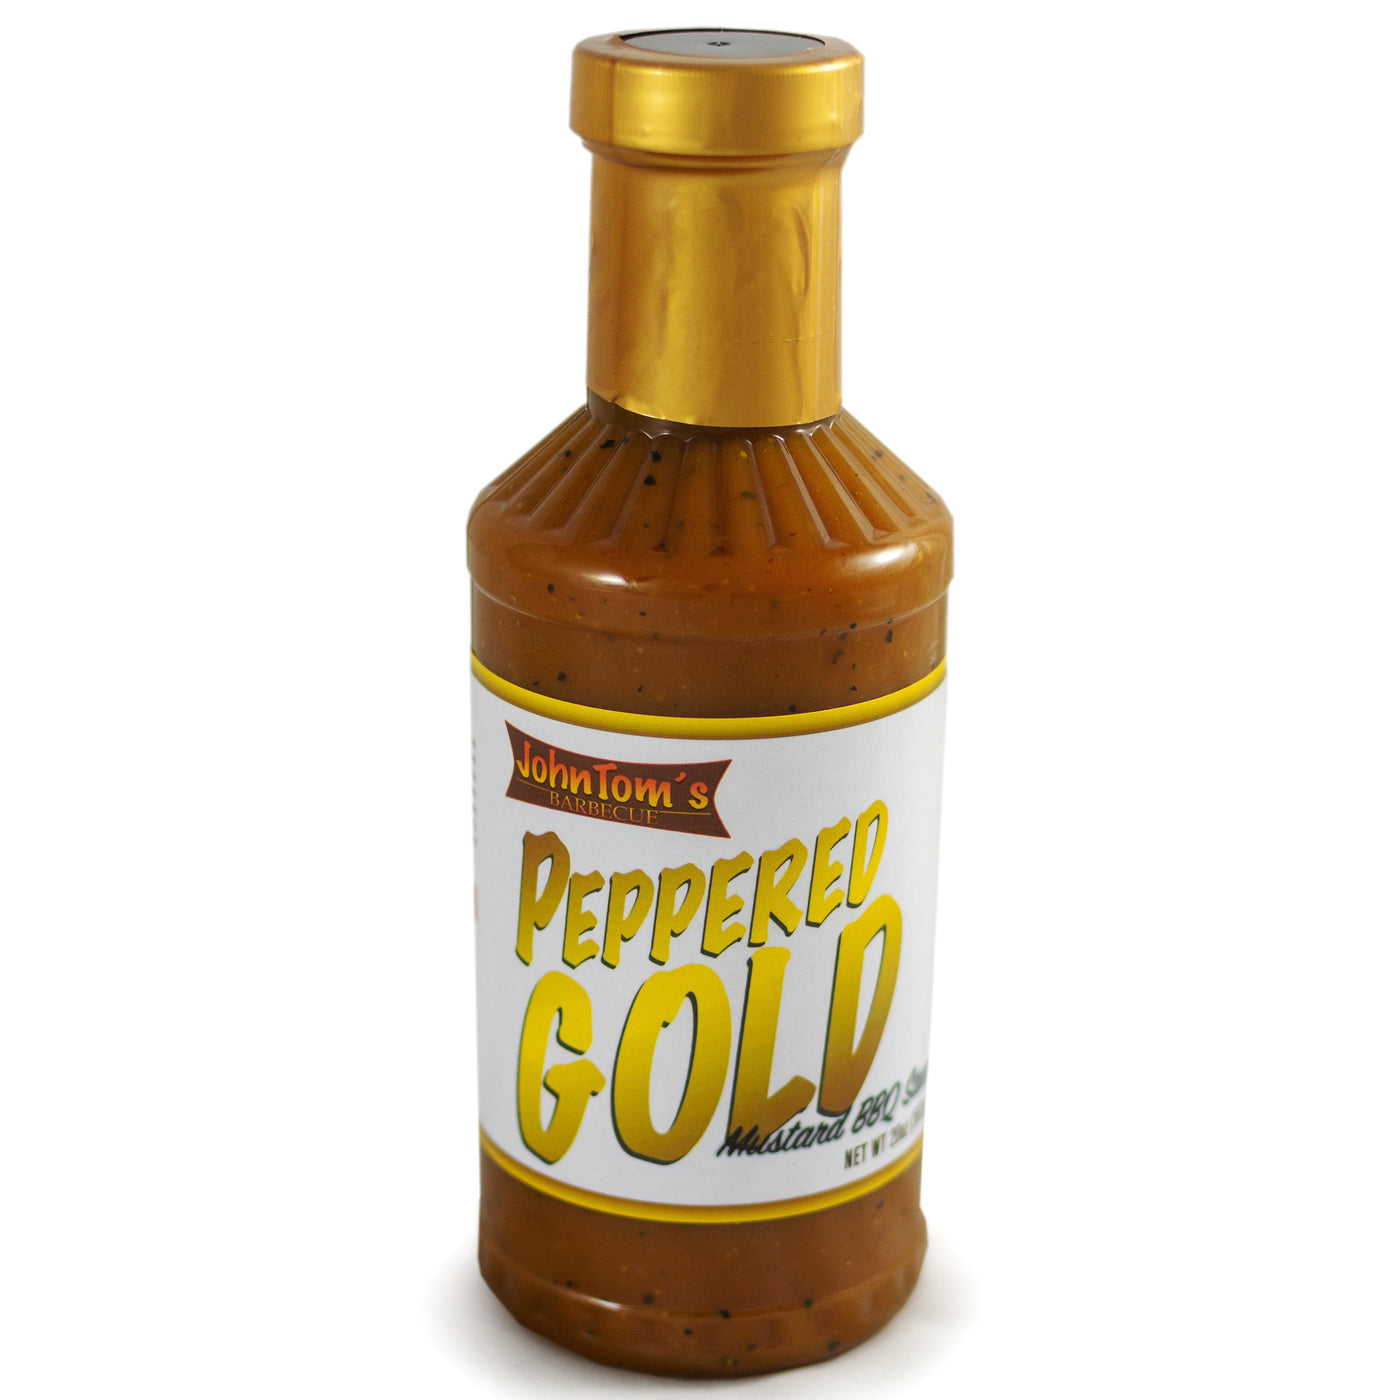 Peppered Gold